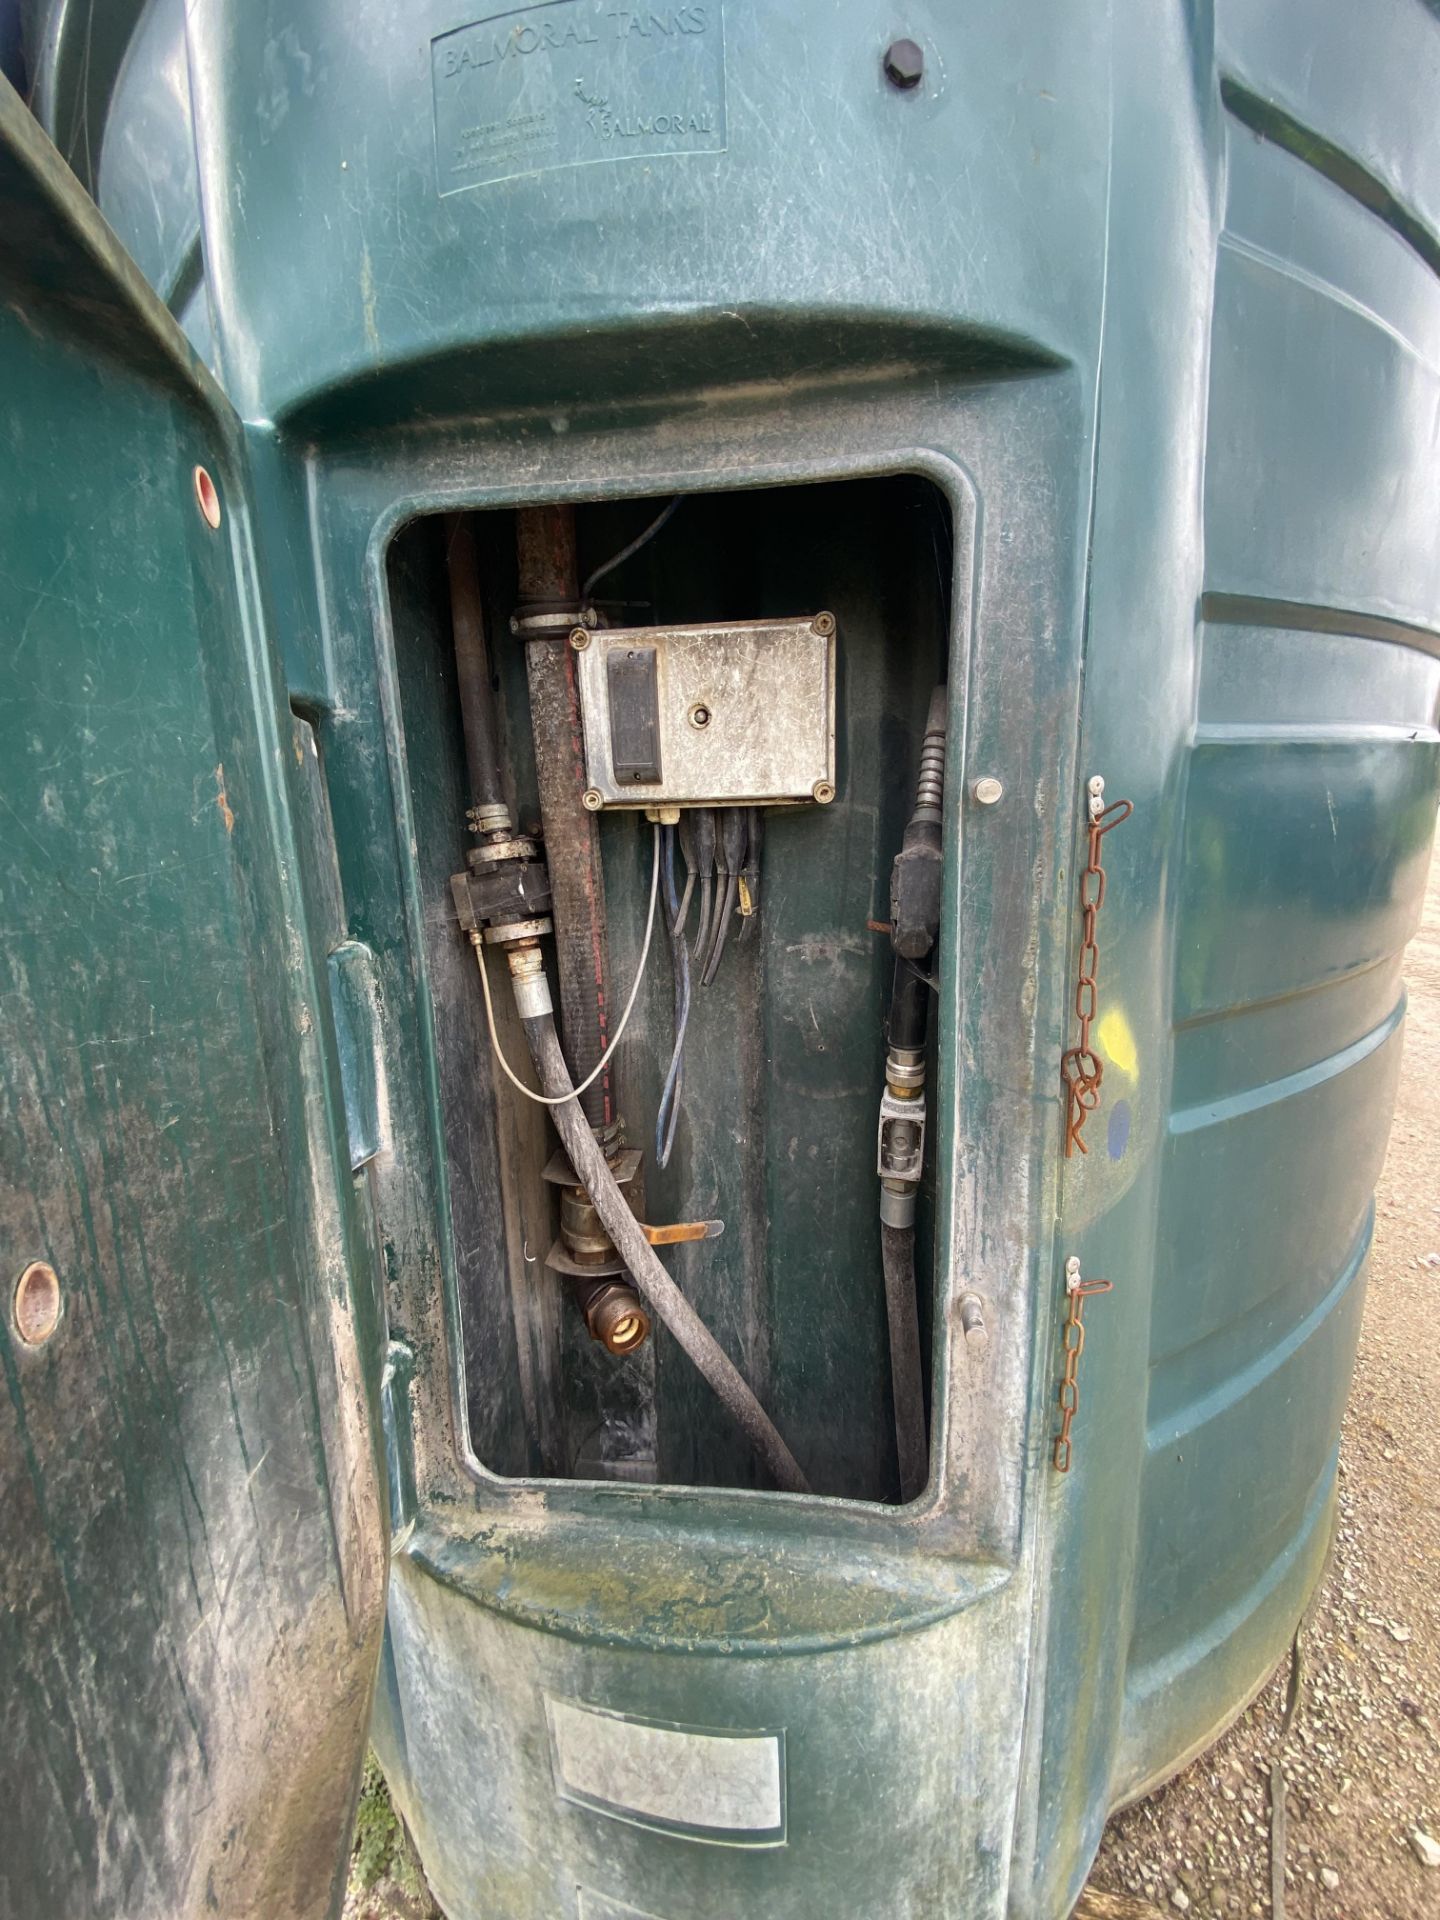 Bunded Plastic Diesel Storage Tank, approx. 2.9m high, with fuel dispensing unit, lot located in - Image 2 of 2